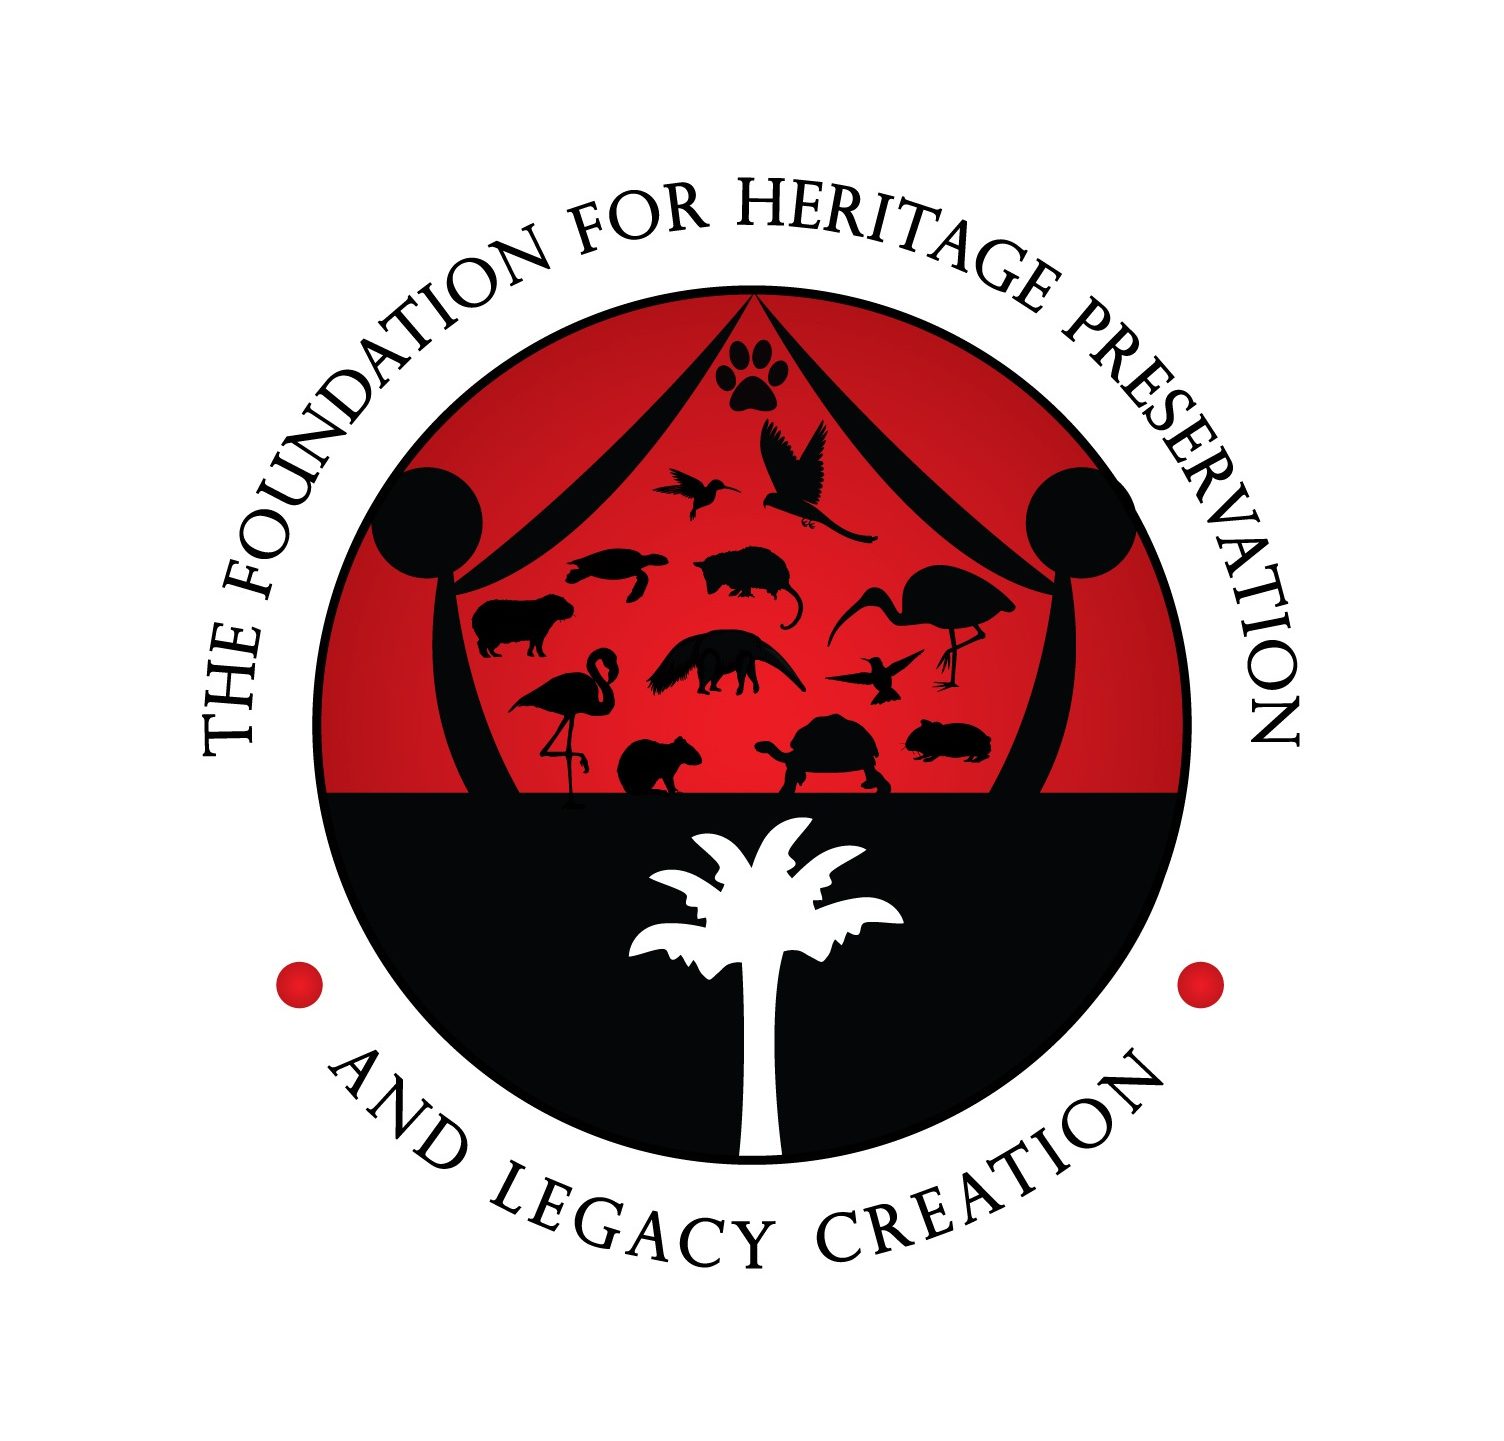 The Foundation for Heritage Preservation & Legacy Creation